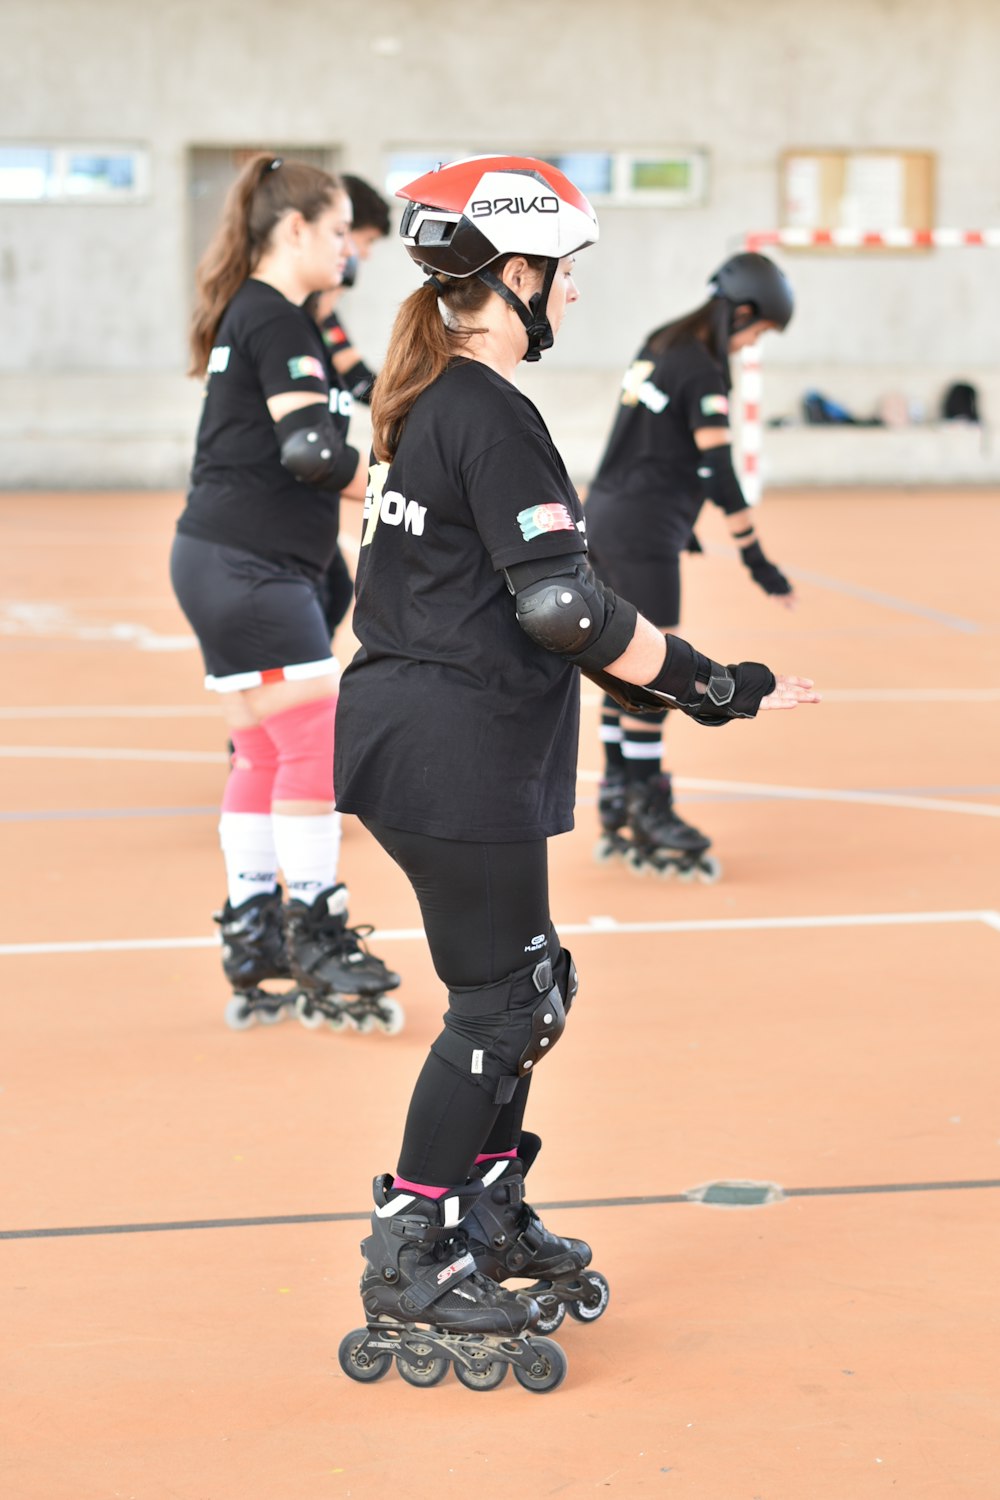 a group of people riding roller skates on a court